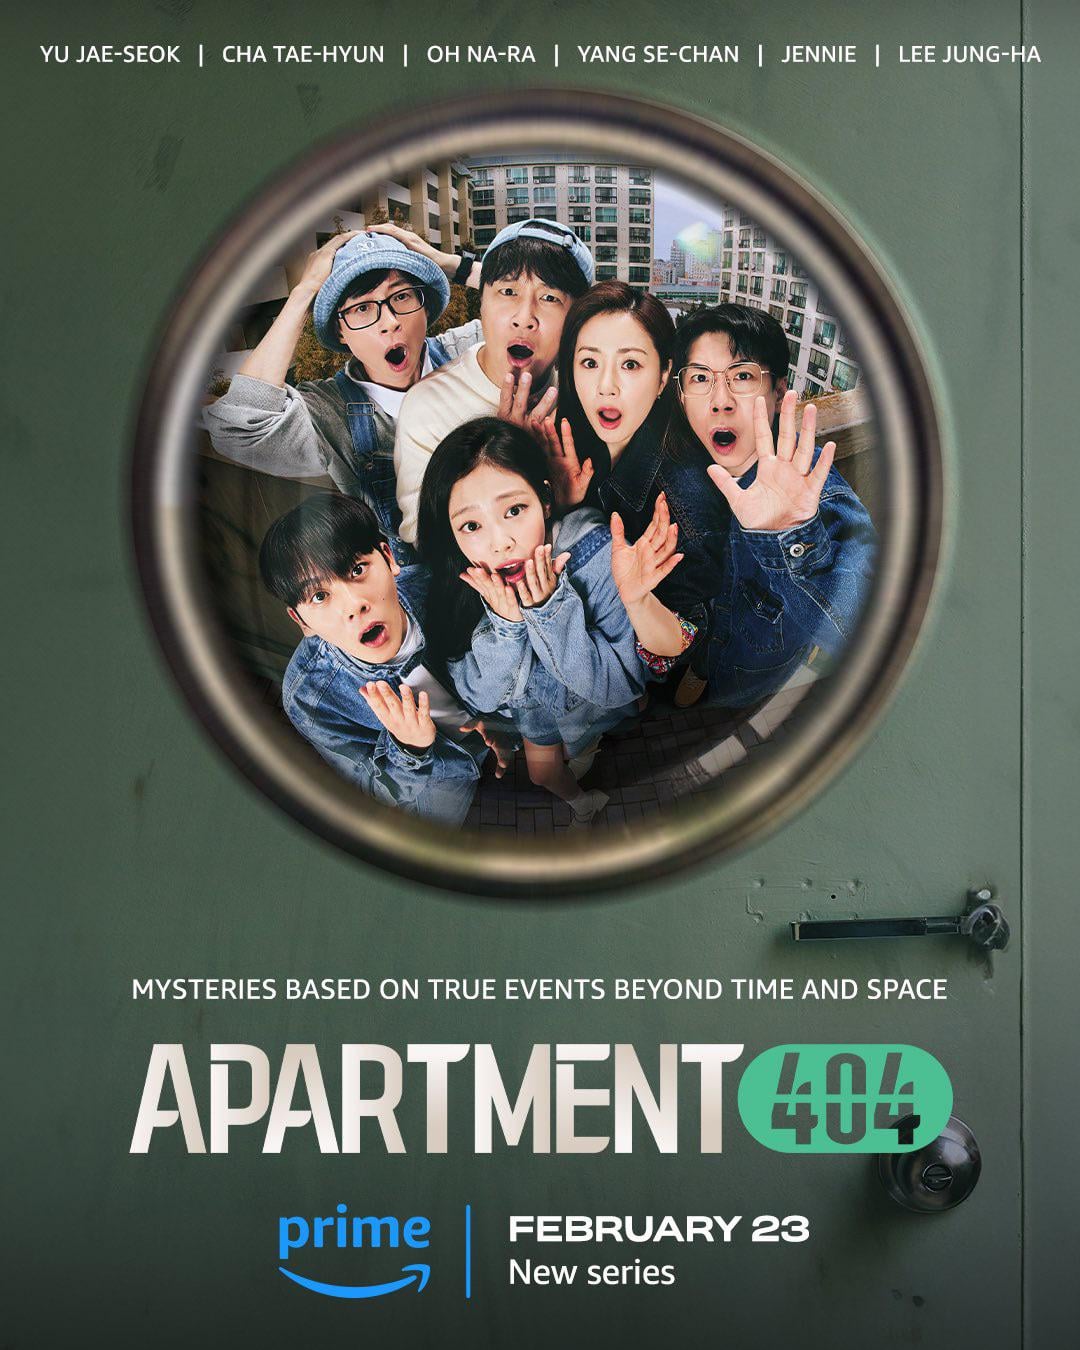 240124 Jennie - ‘Apartment 404’ will be available for streaming on Prime from Feb 23